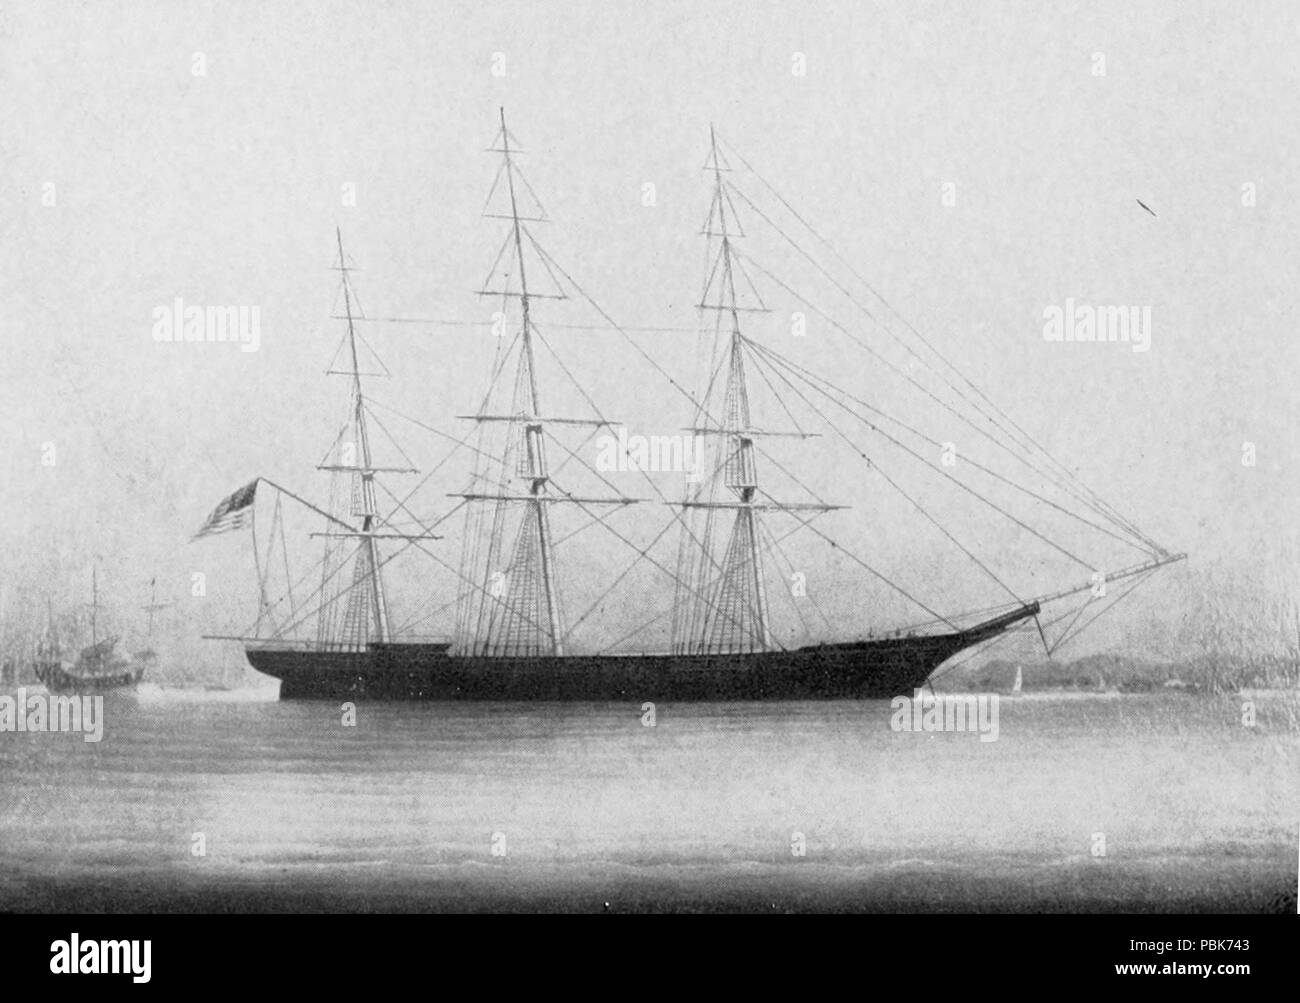 . English: The clipper ship Gravina (860 tons), built in Hoboken, New Jersey in 1853 by Isaac C. Smith & Son. Unknown date; probably 1850s 727 Gravina (clipper ship) Stock Photo